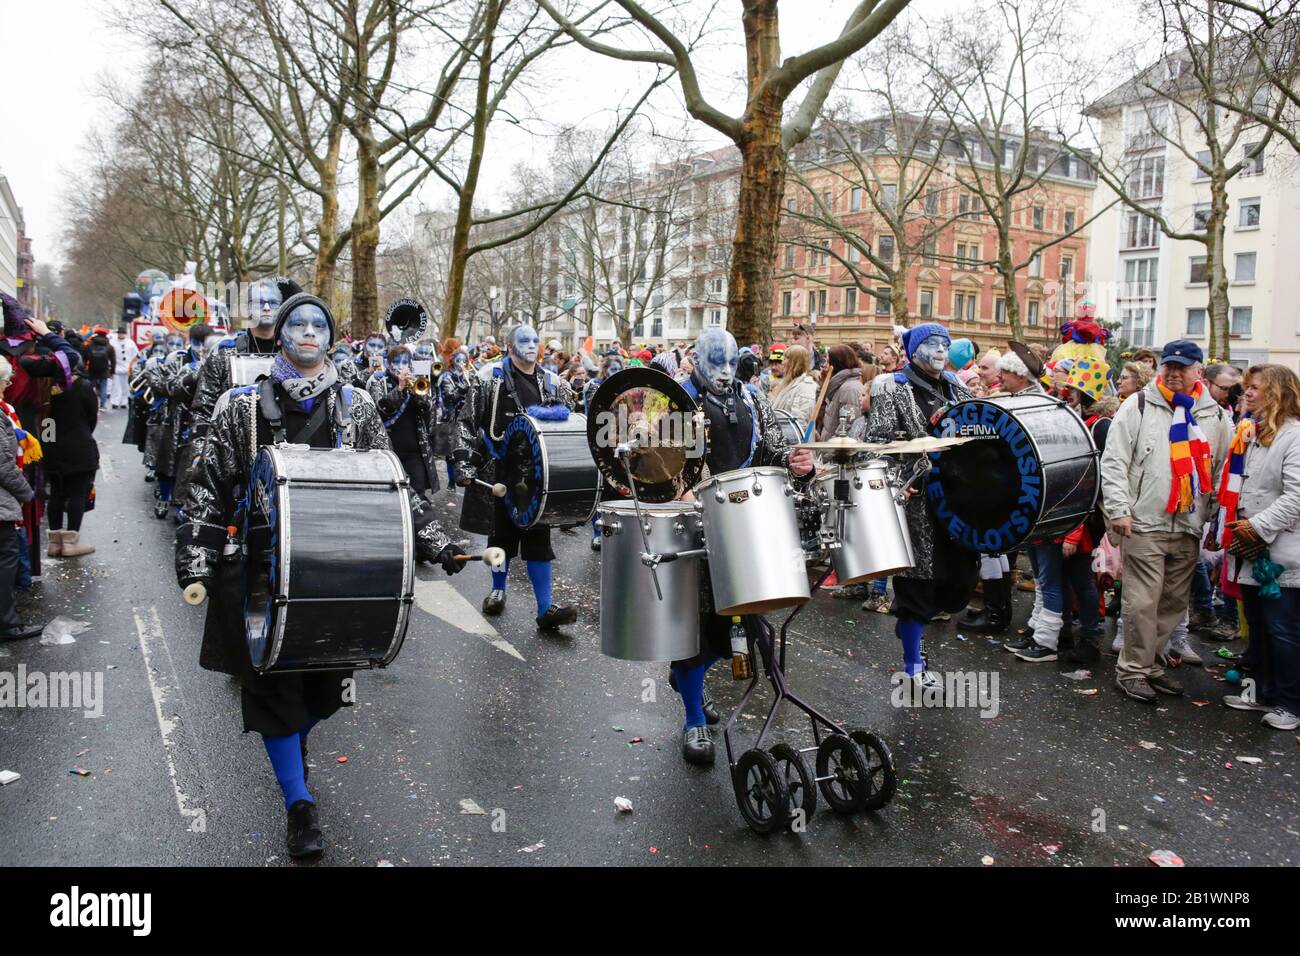 Mainz, Germany. 24th February 2020. Members of the Guggenmusik band Level Lots take march in the the Mainz Rose Monday parade. Around half a million people lined the streets of Mainz for the traditional Rose Monday Carnival Parade. The 9 km long parade with over 9,000 participants is one of the three large Rose Monday Parades in Germany. Stock Photo